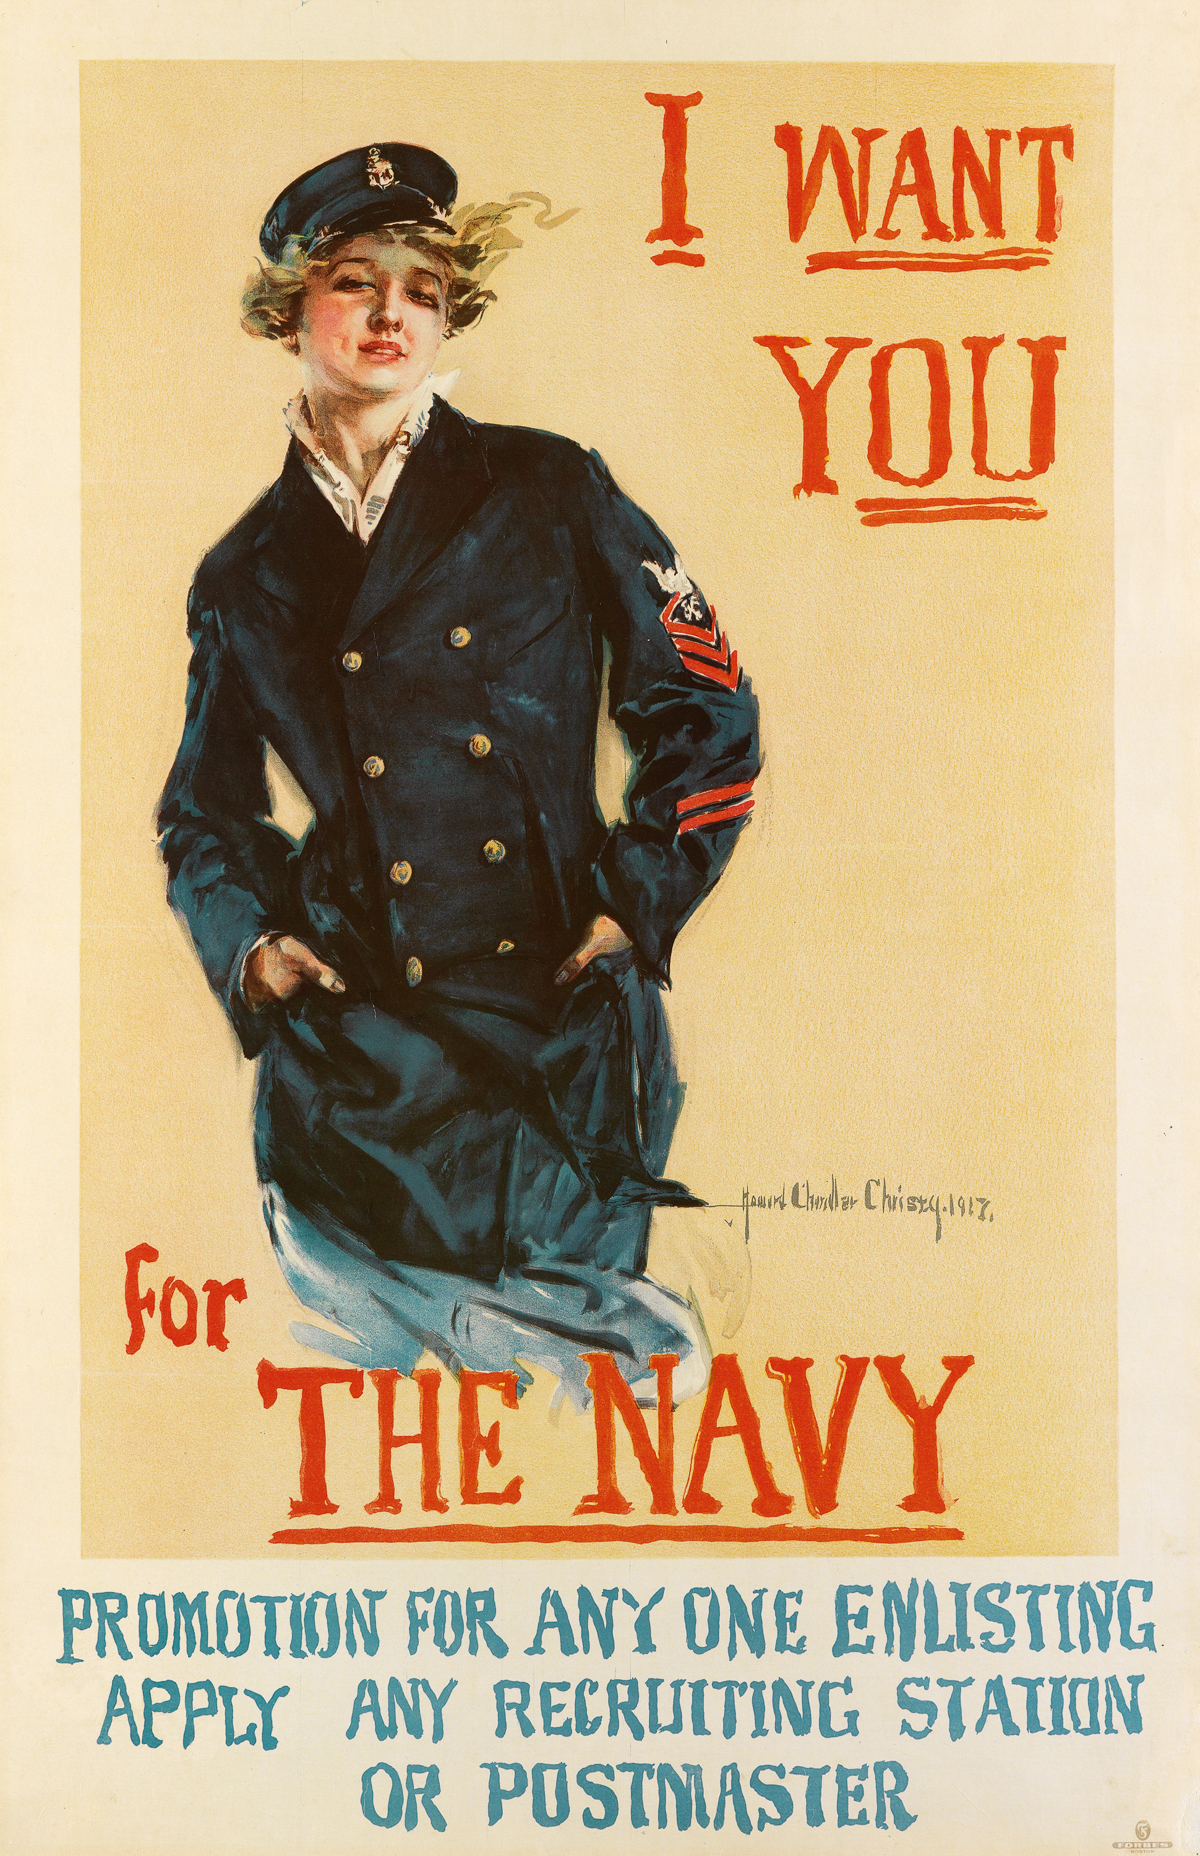 HOWARD CHANDLER CHRISTY (1873-1952). I WANT YOU FOR THE NAVY. 1917. 40x26 inches, 103x66 cm. Forbes, Boston.